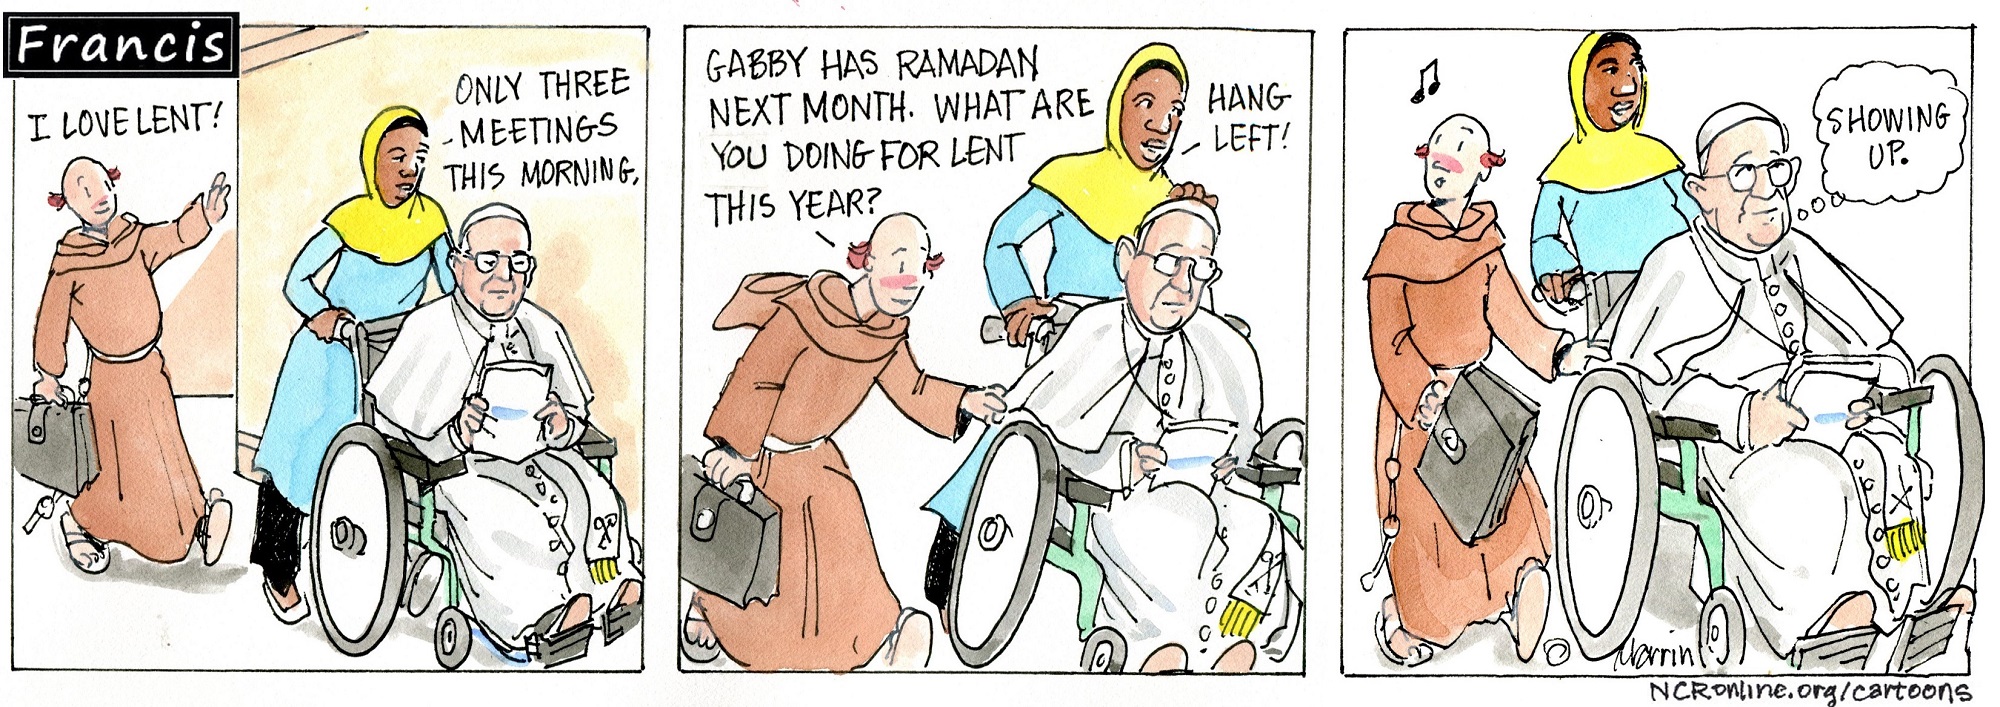 Francis, the comic strip: What is Francis doing for Lent this year?